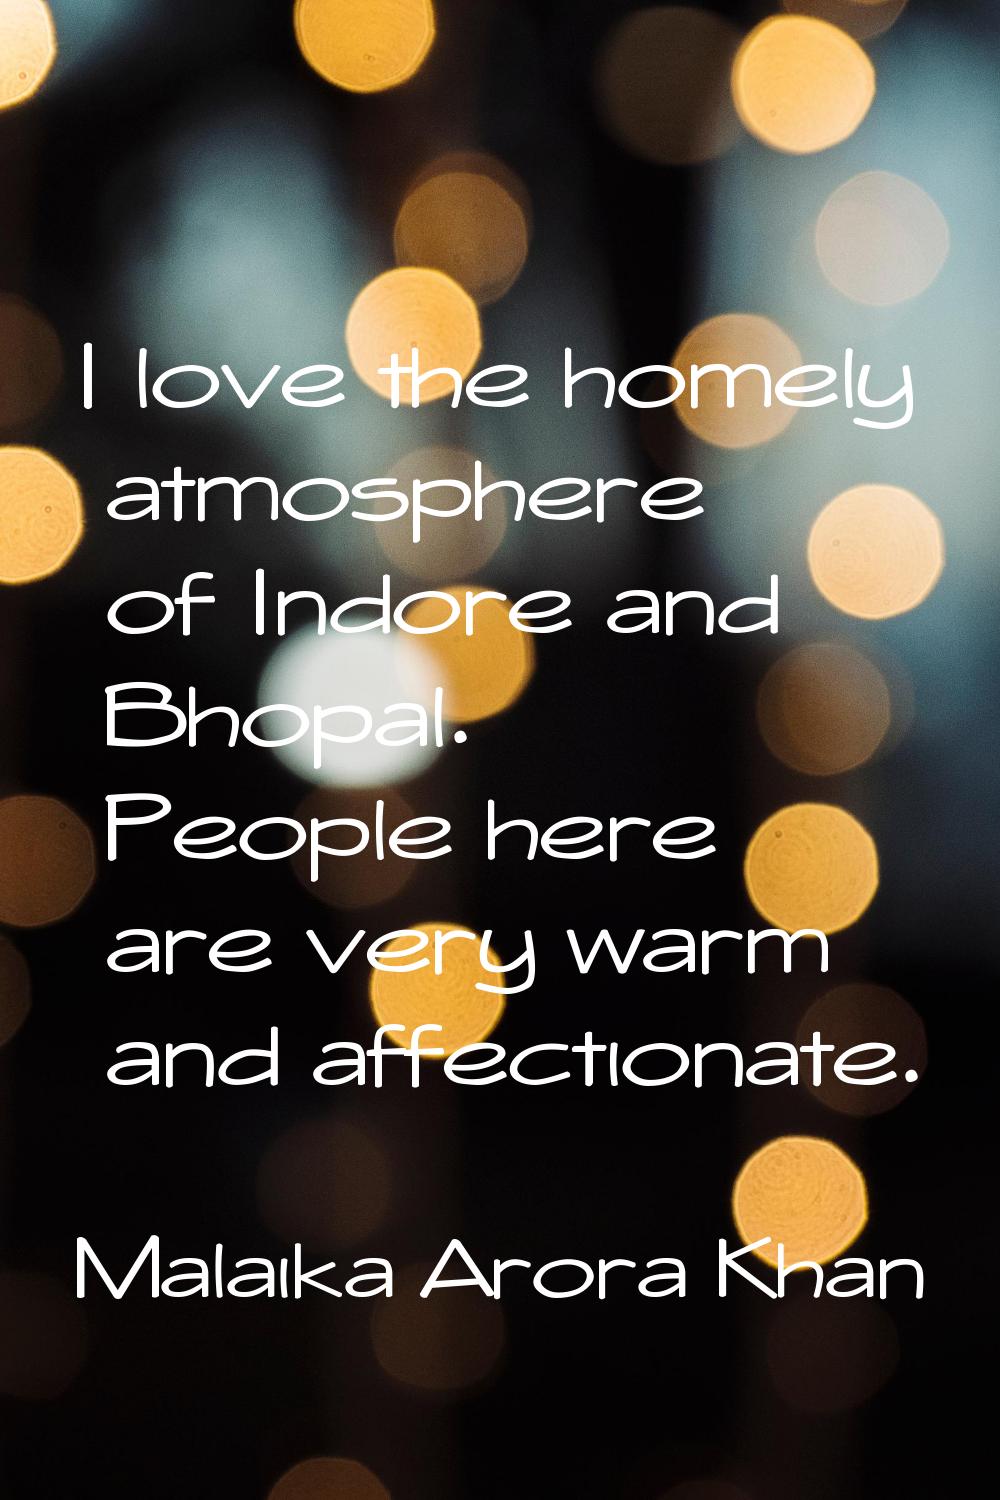 I love the homely atmosphere of Indore and Bhopal. People here are very warm and affectionate.